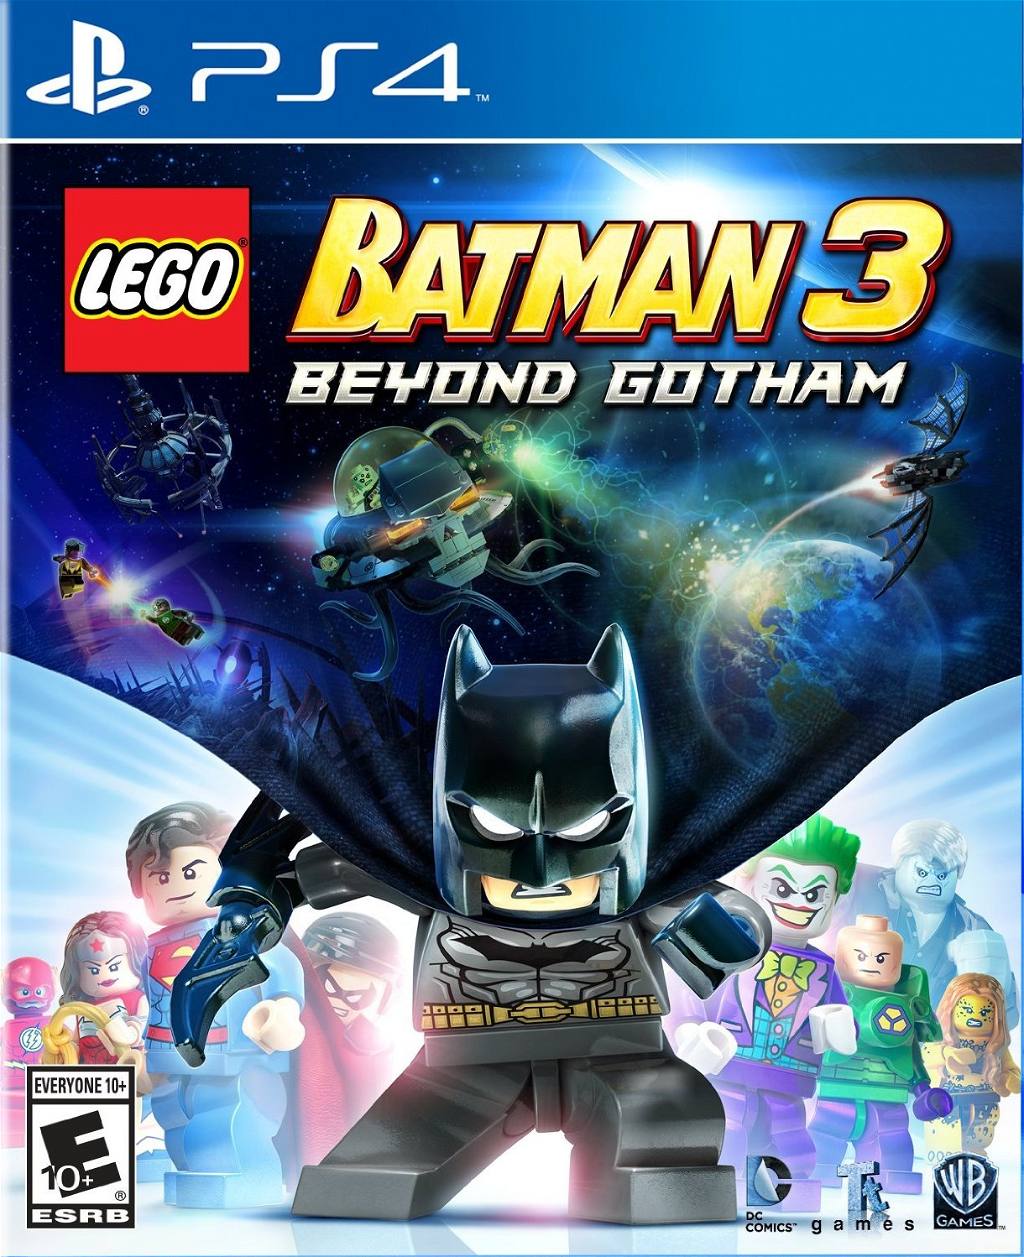 Afname Perfect repetitie LEGO Batman 3: Beyond Gotham for PlayStation 4